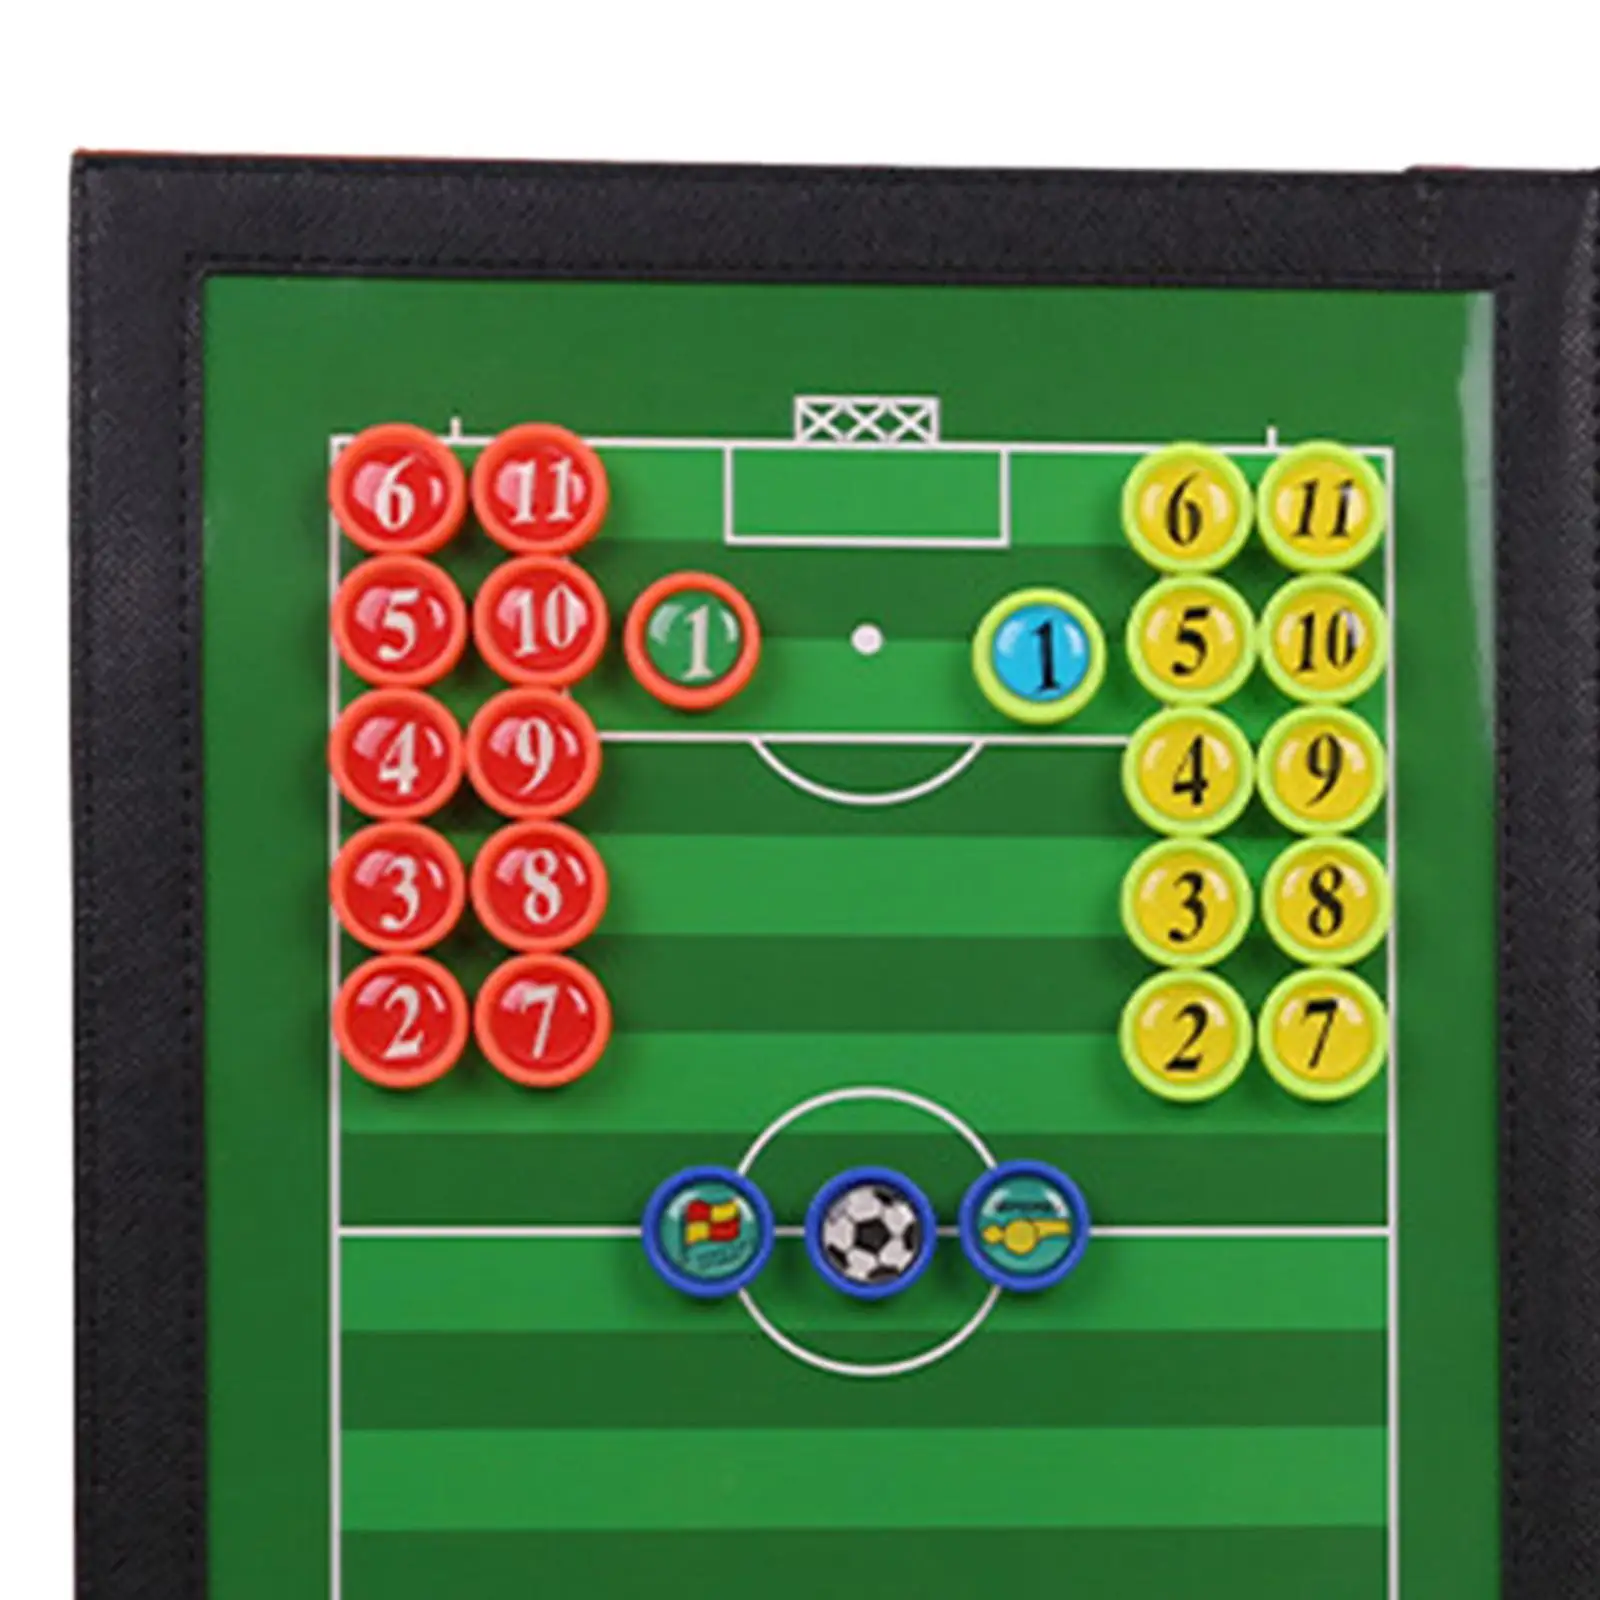 Portable Football Coaches Board with Marker Pen Guidance Training Assistant Large Soccer Coaching Clipboard for Strategizing